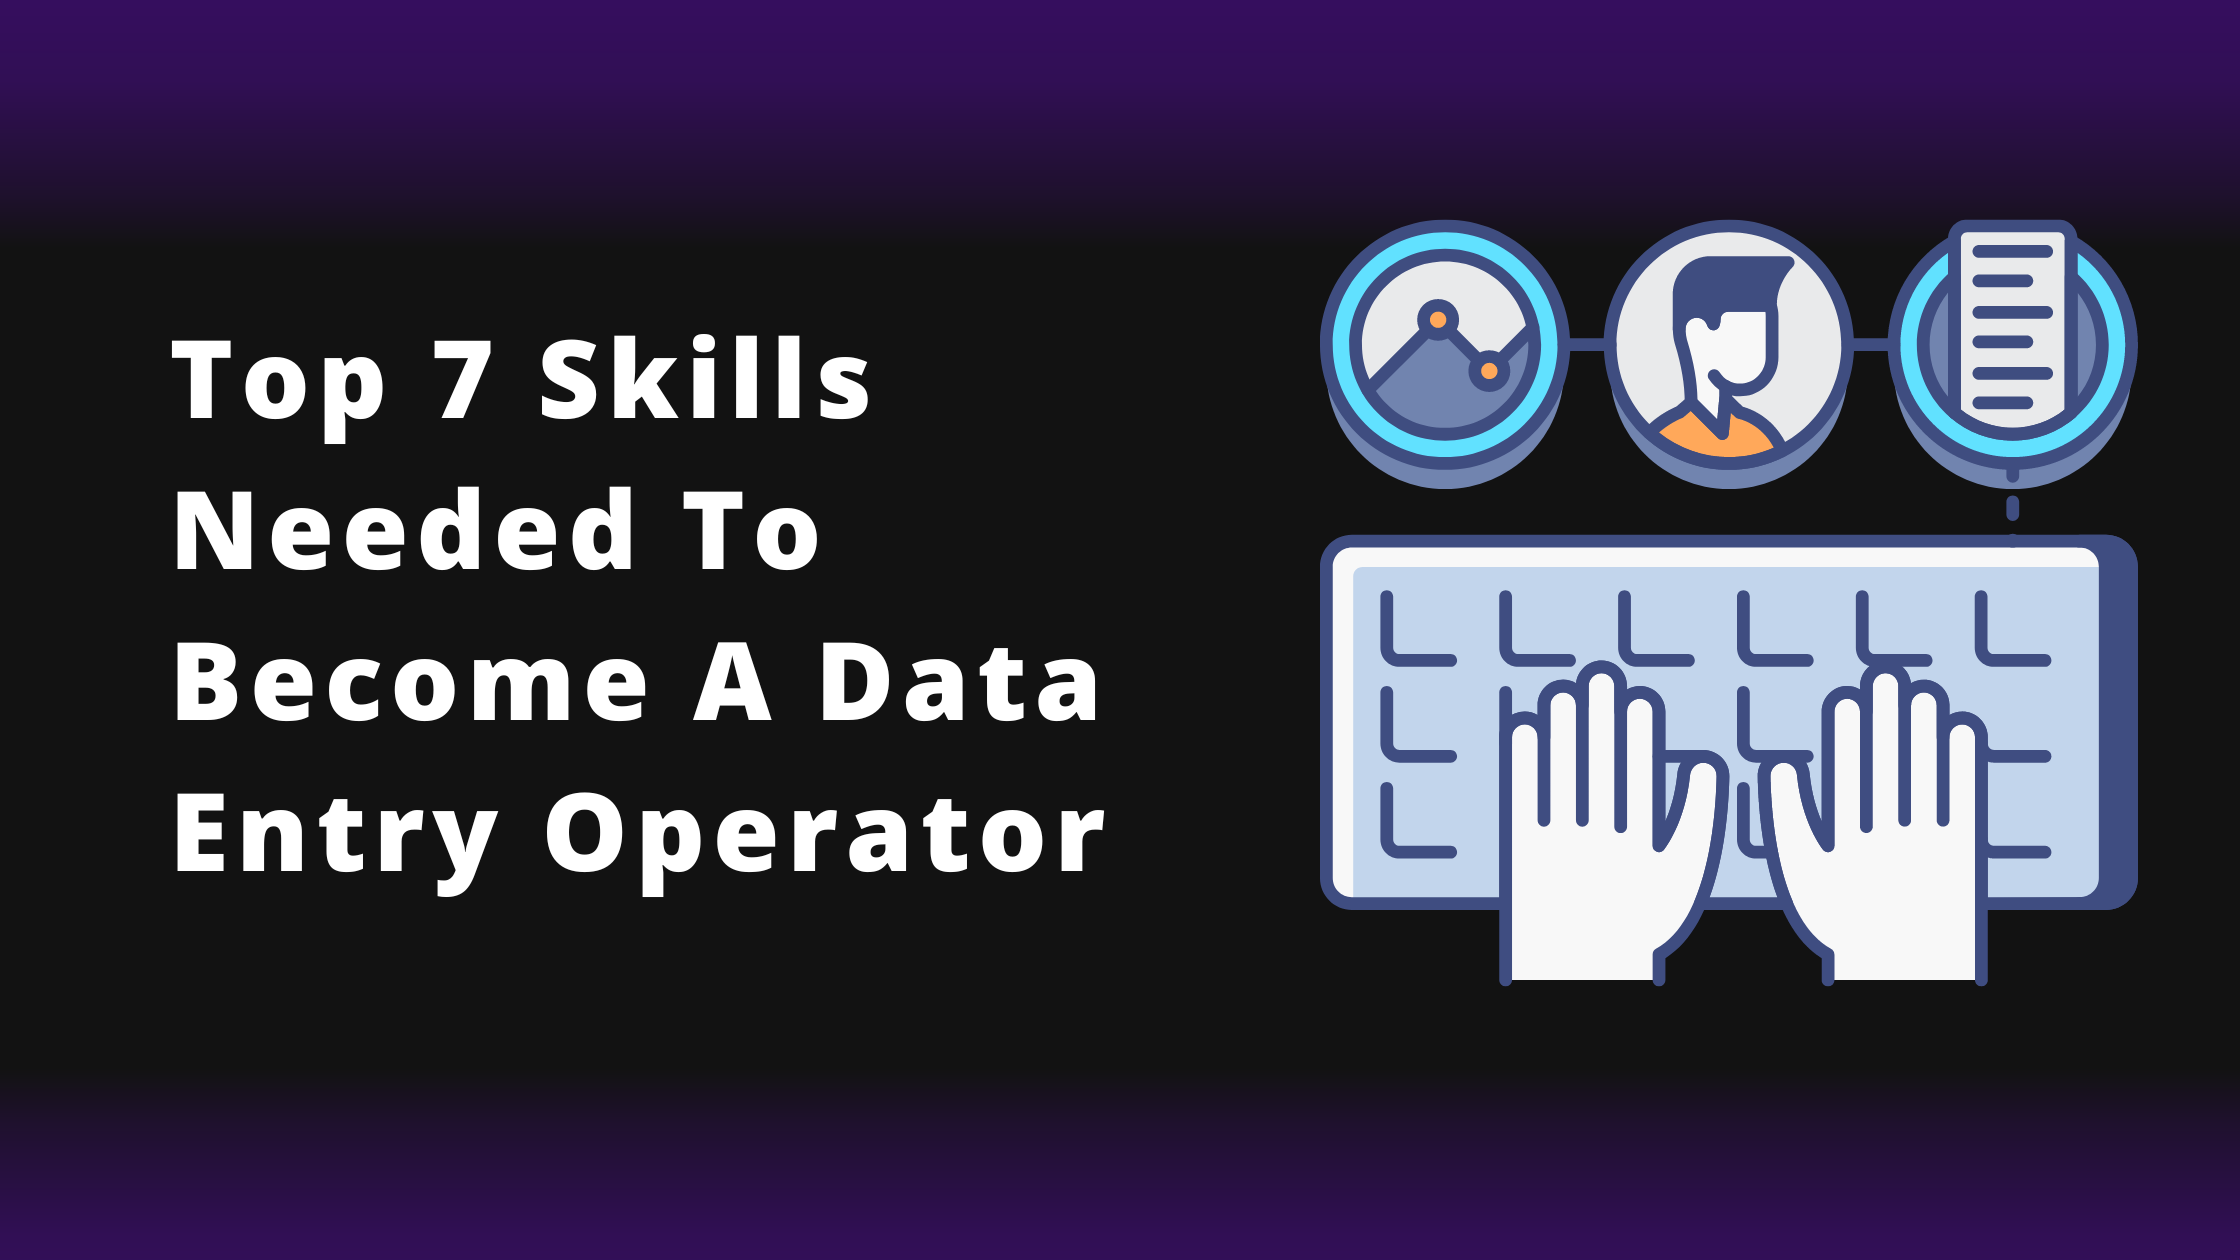 Top 7 skills needed to become a data entry operator